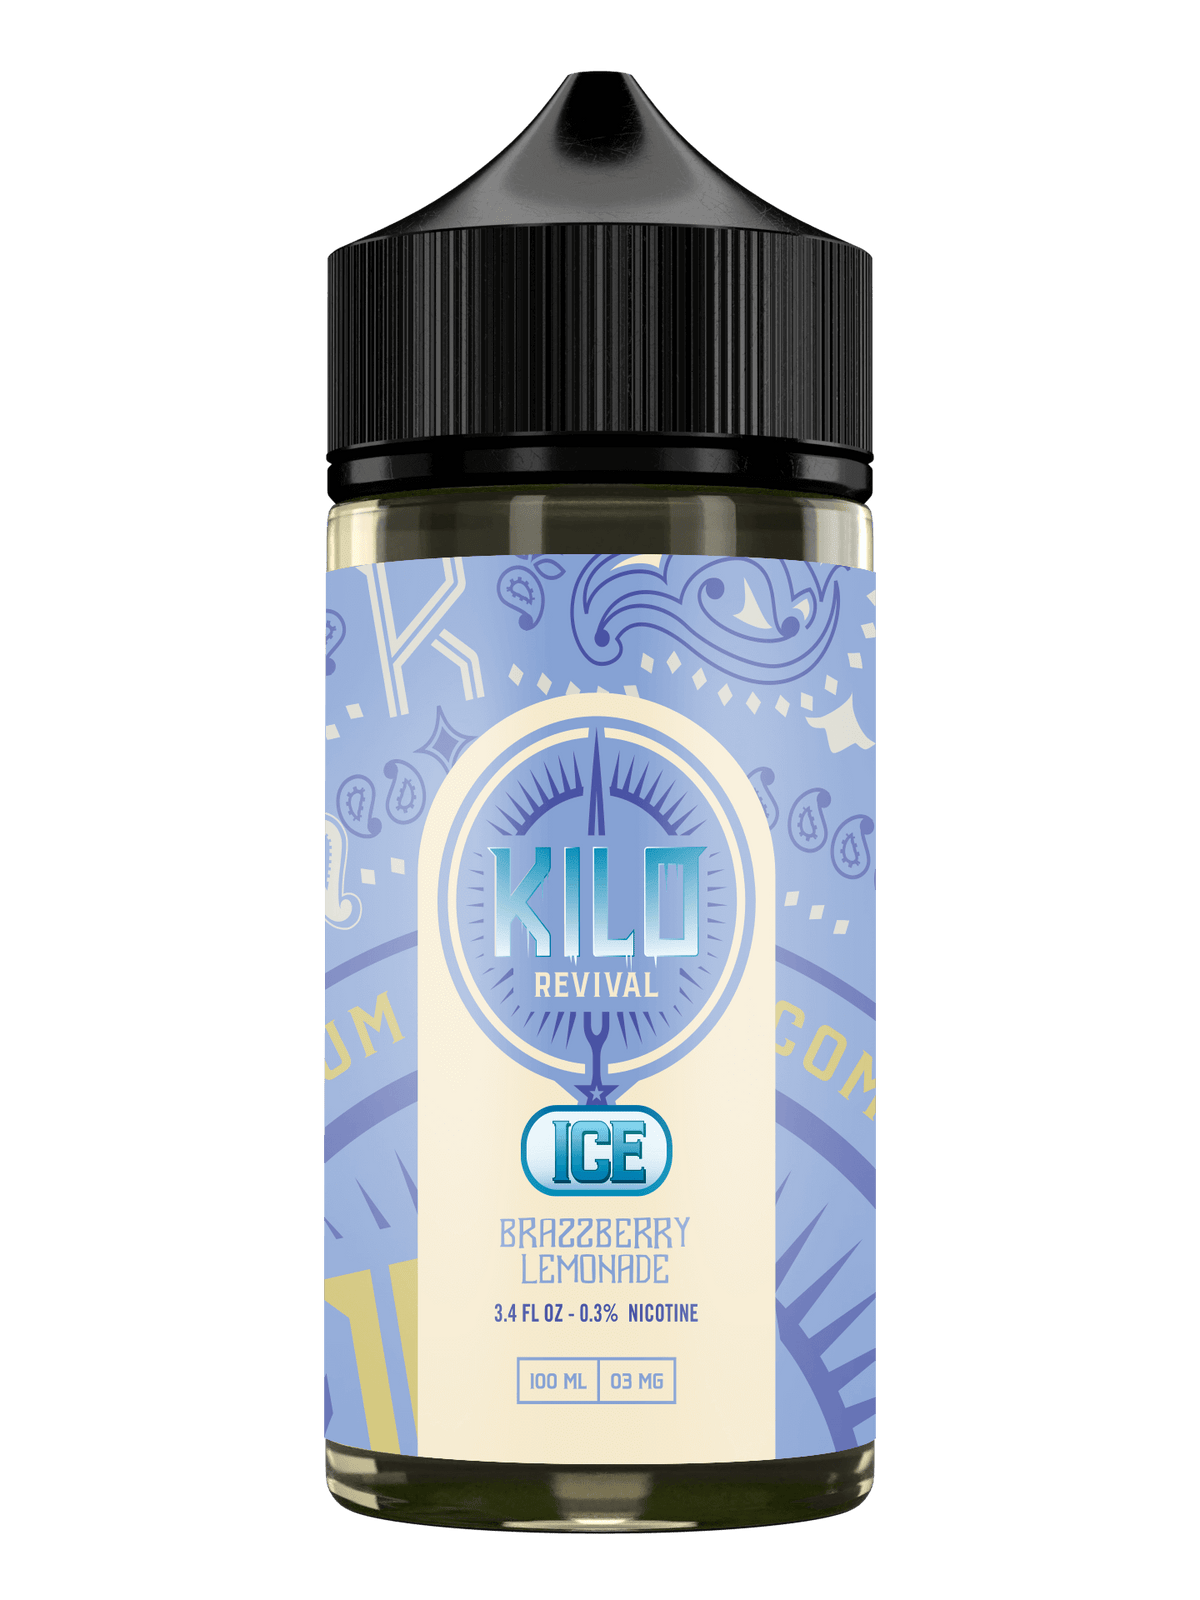 Brazzberry Lemonade Ice by Kilo Revival Tobacco-Free Nicotine Series 100mL with Packaging